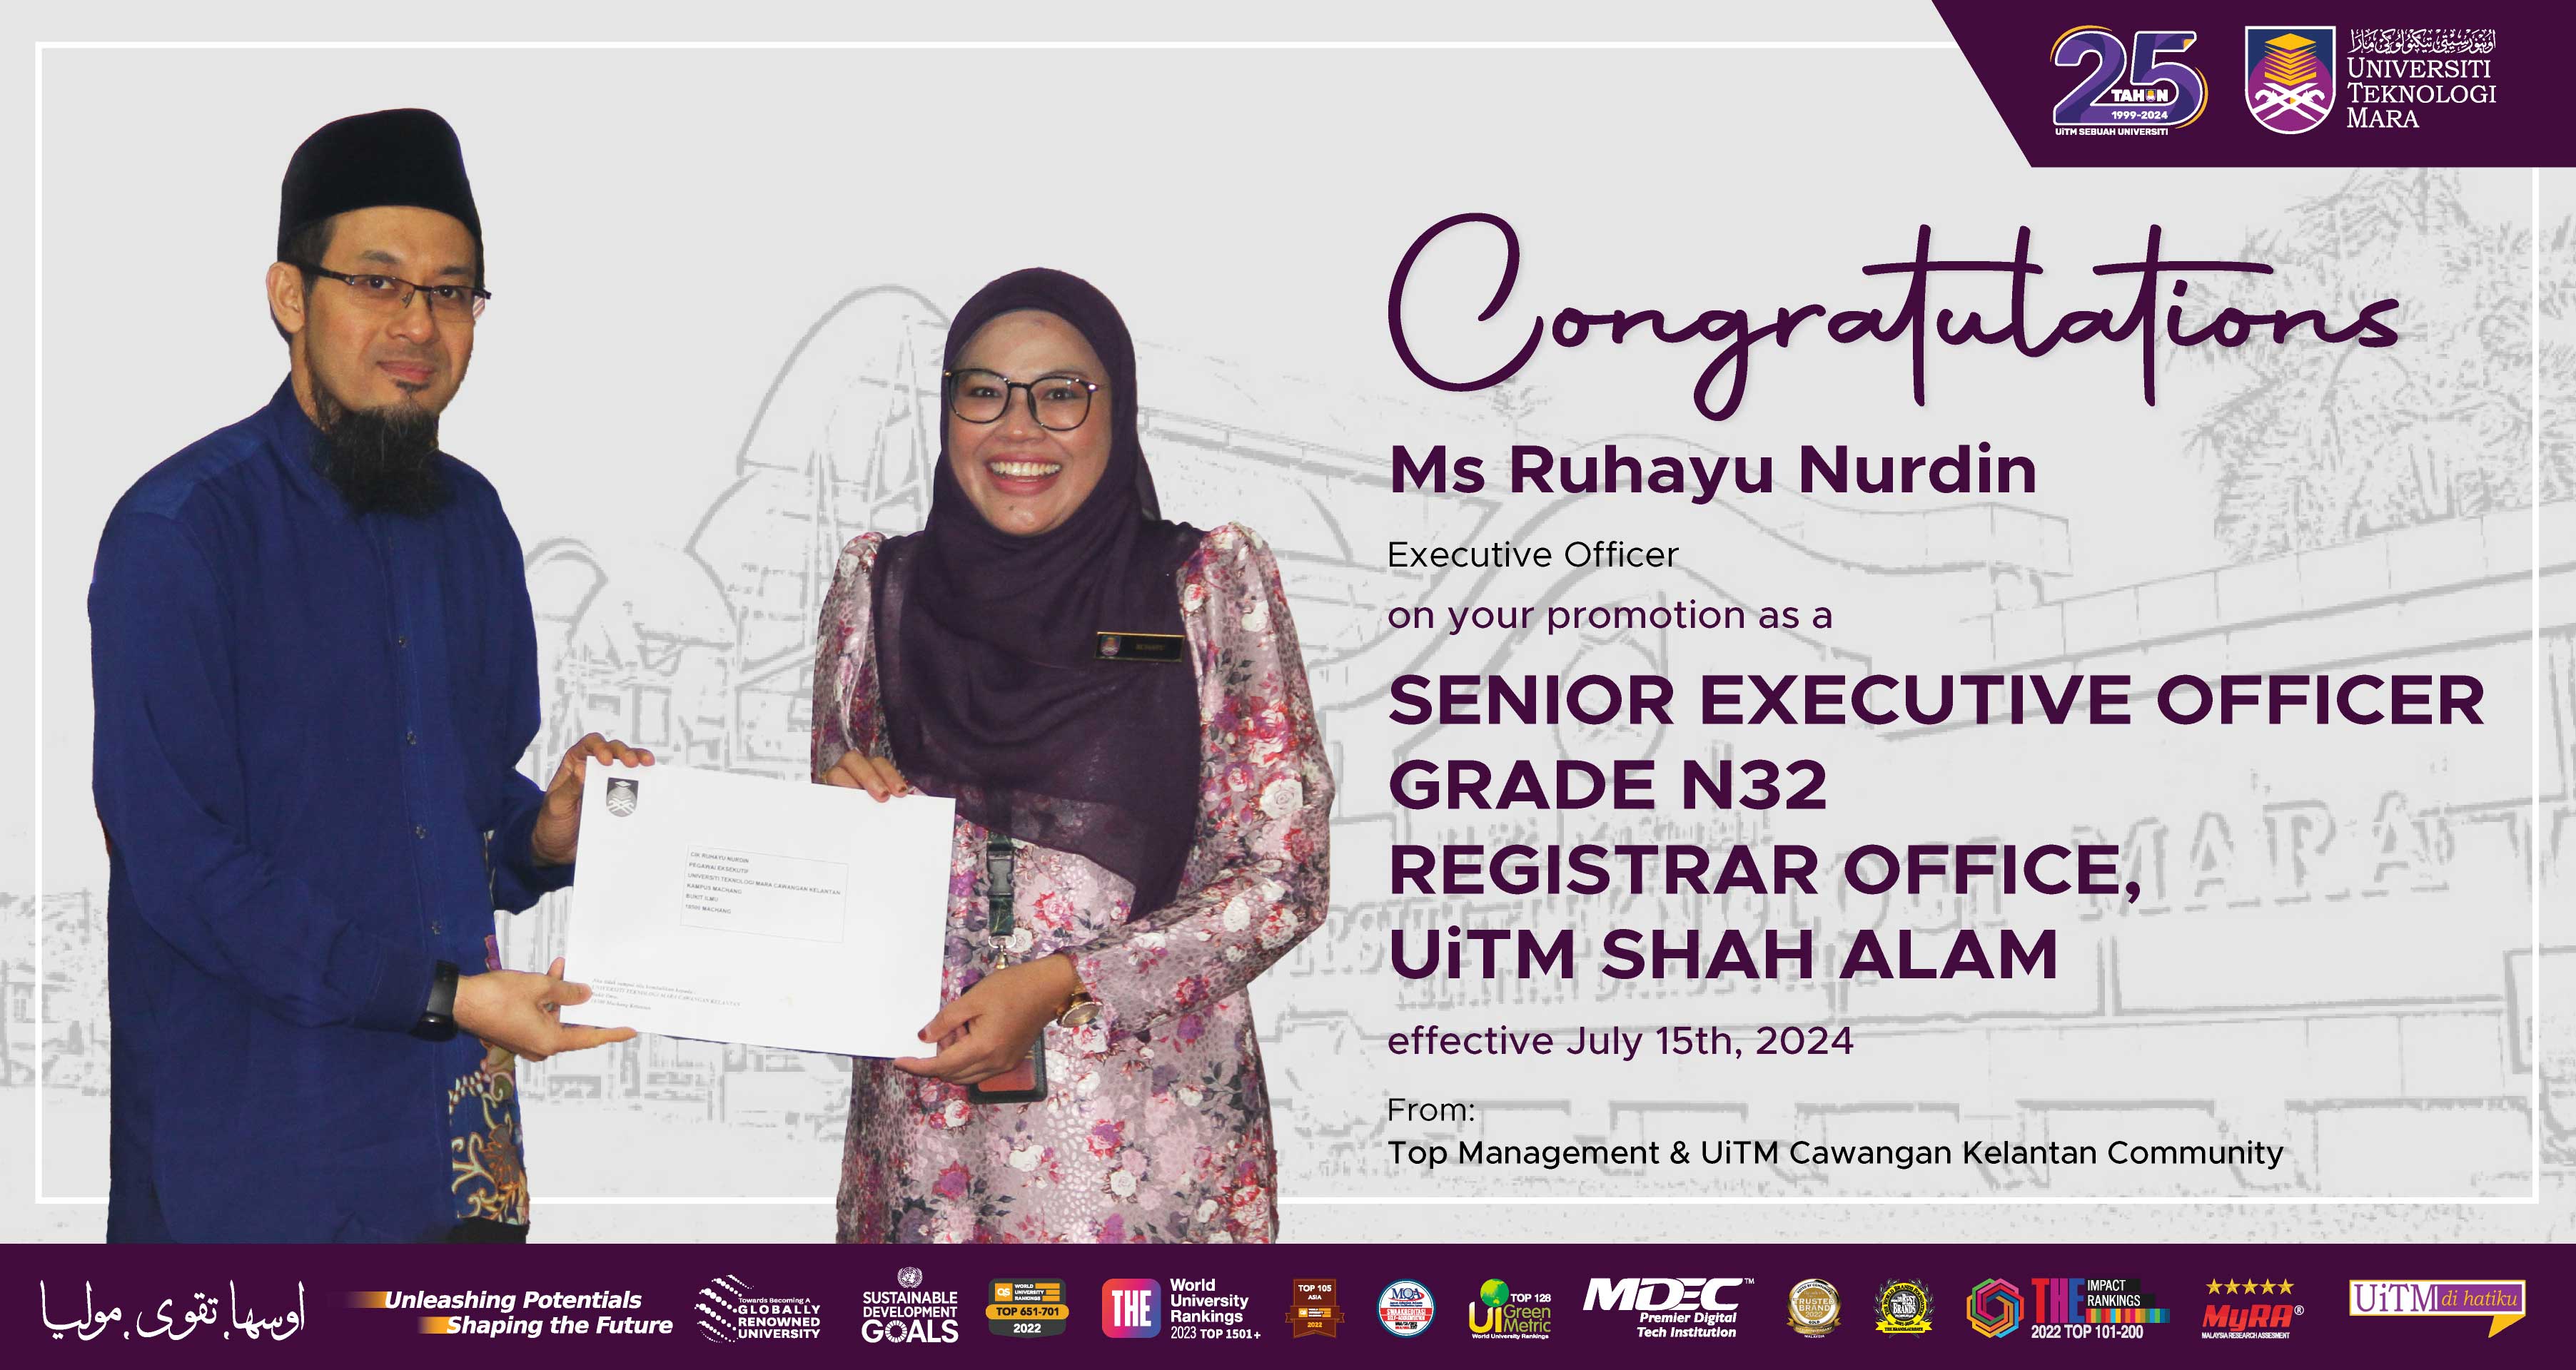 Congratulations and All the Best!!! Ms Ruhayu Nurdin, Senior Executive Officer Grade N32